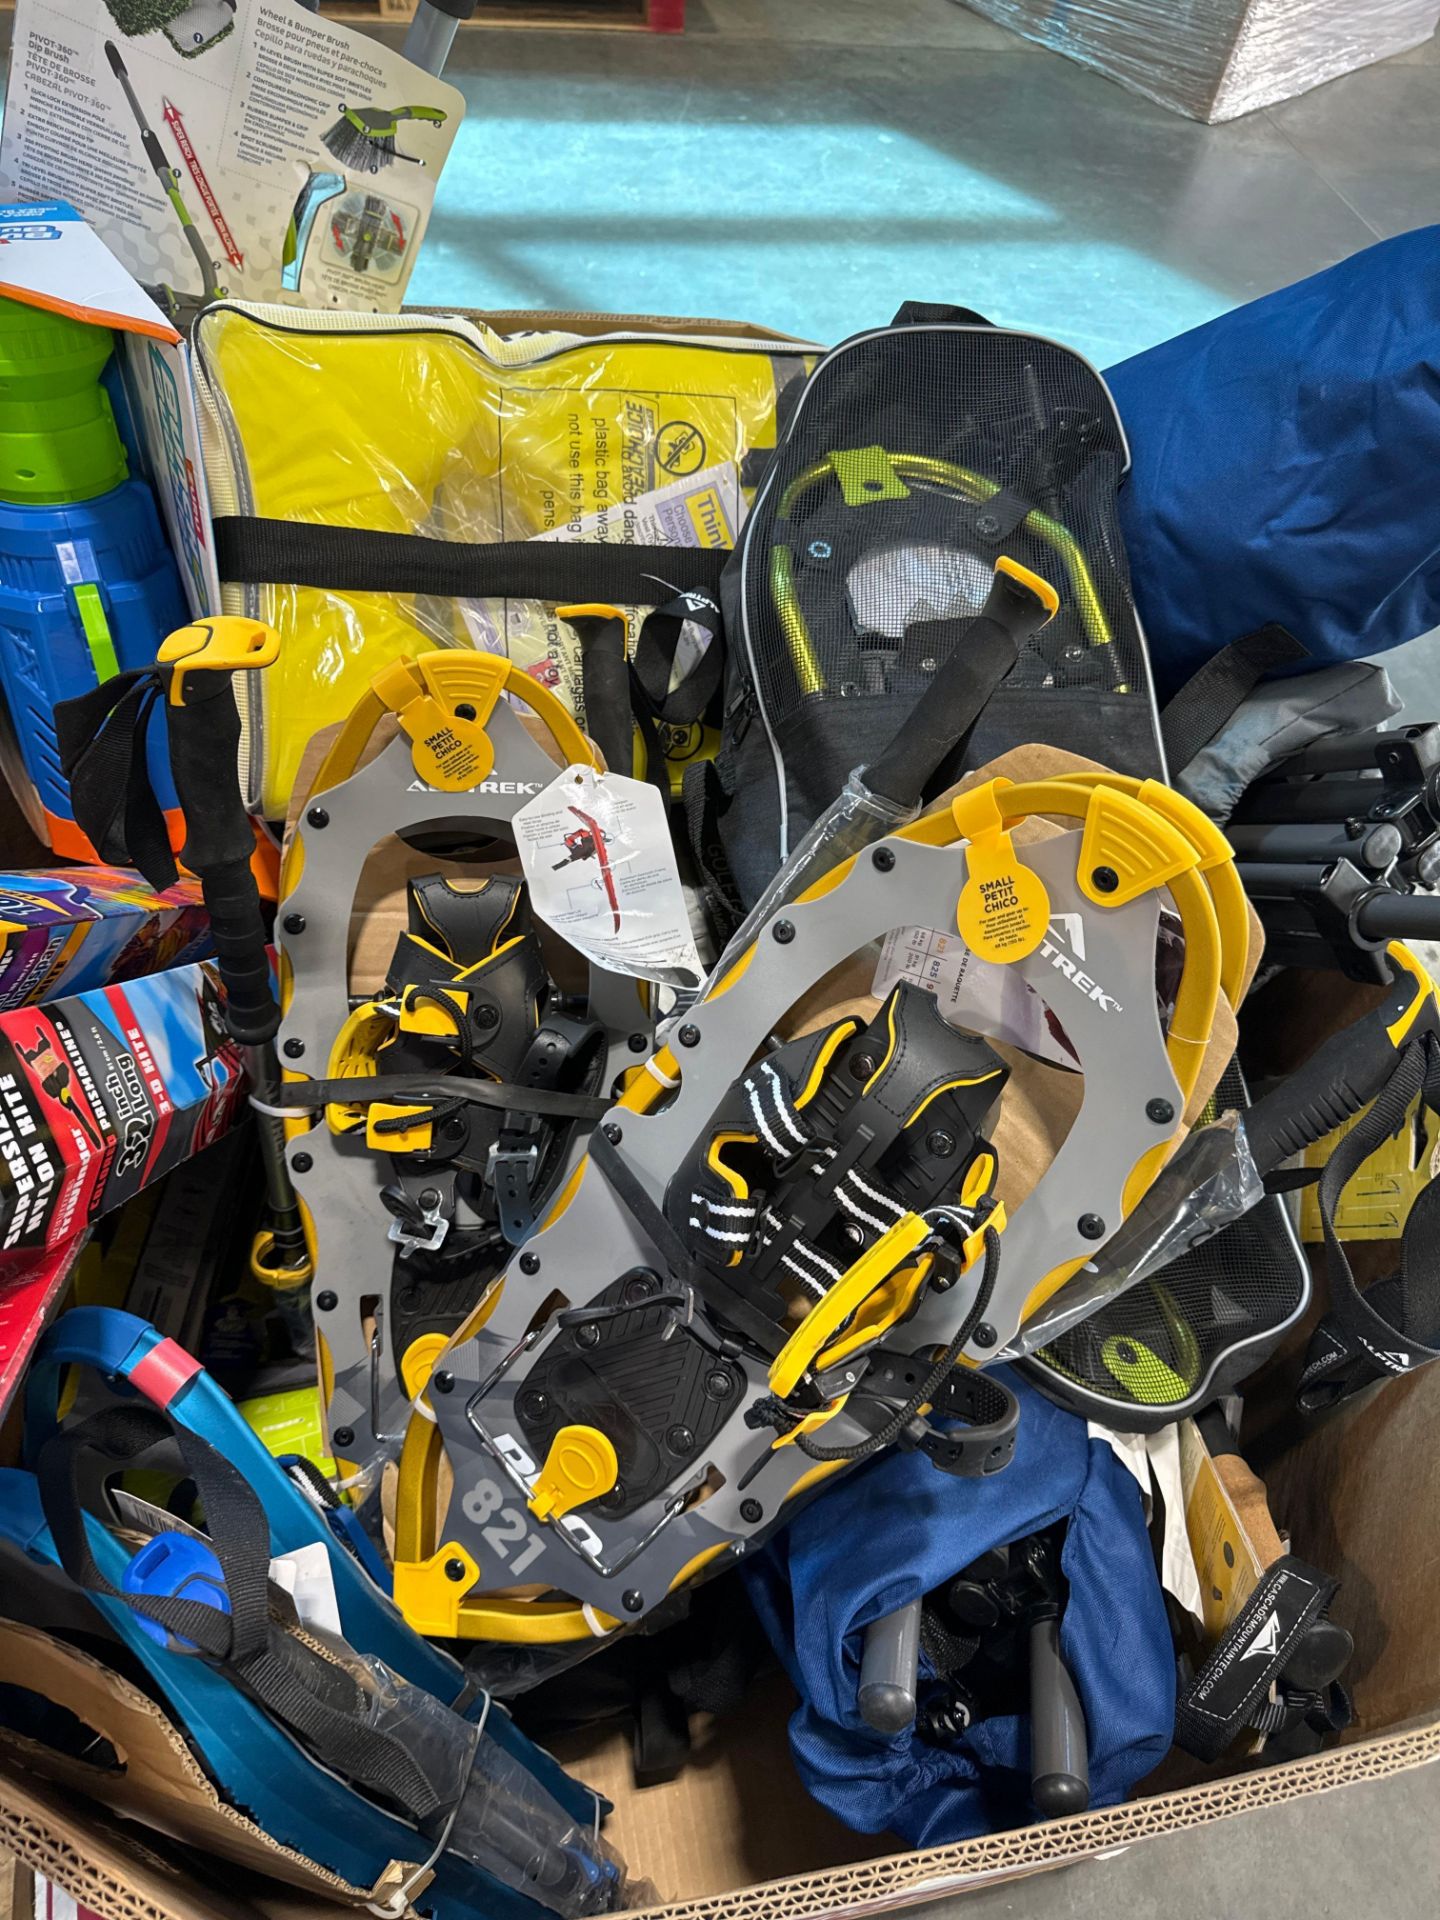 Kites, life jackets, car wash accessories, chairs, hiking poles, golf gloves and more - Image 10 of 10